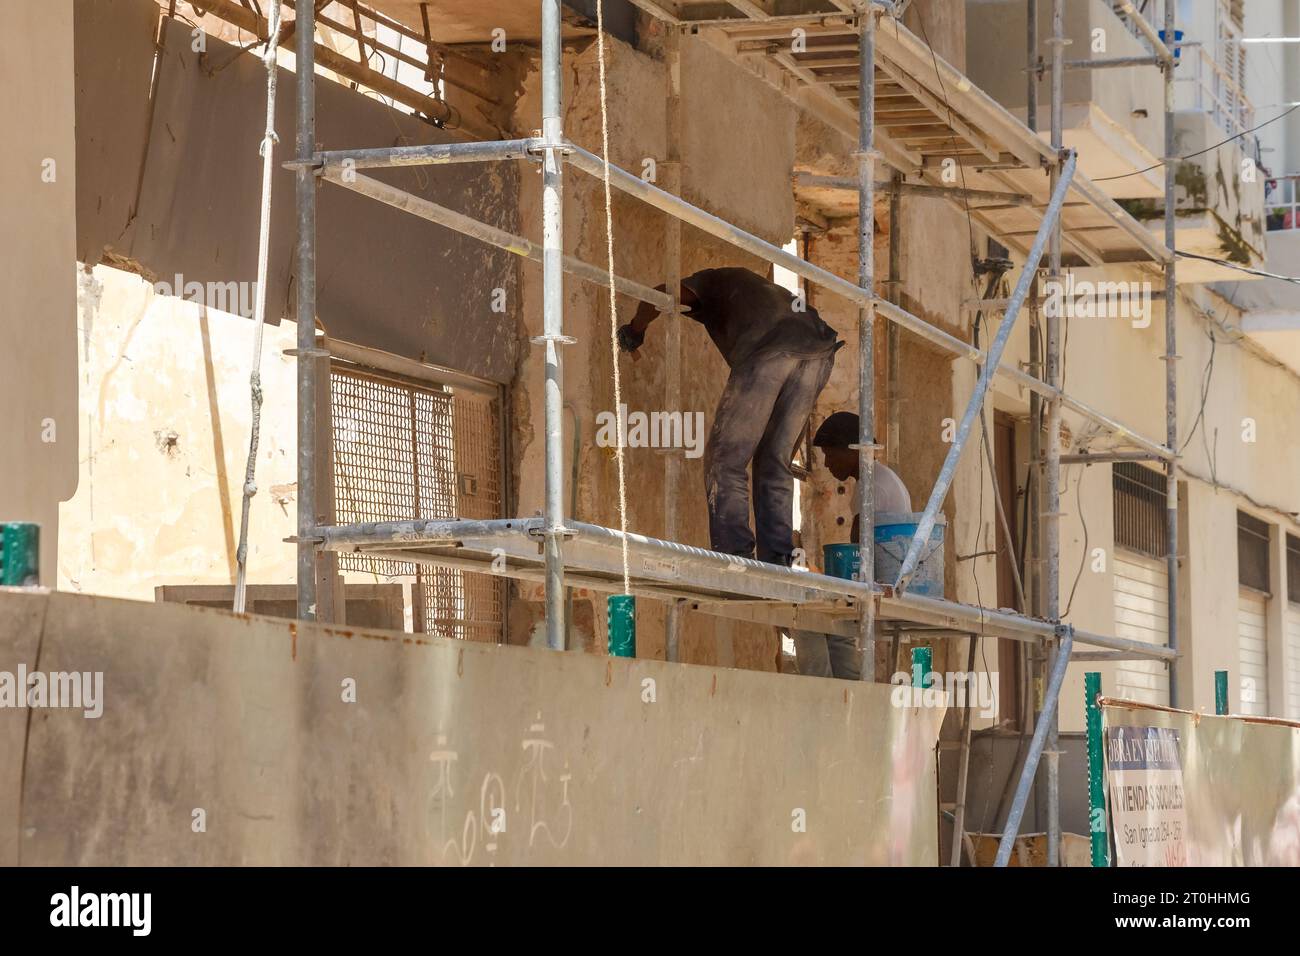 Two male construction workers are in a scaffolding. They are building  or repairing an apartment residential structure. Stock Photo